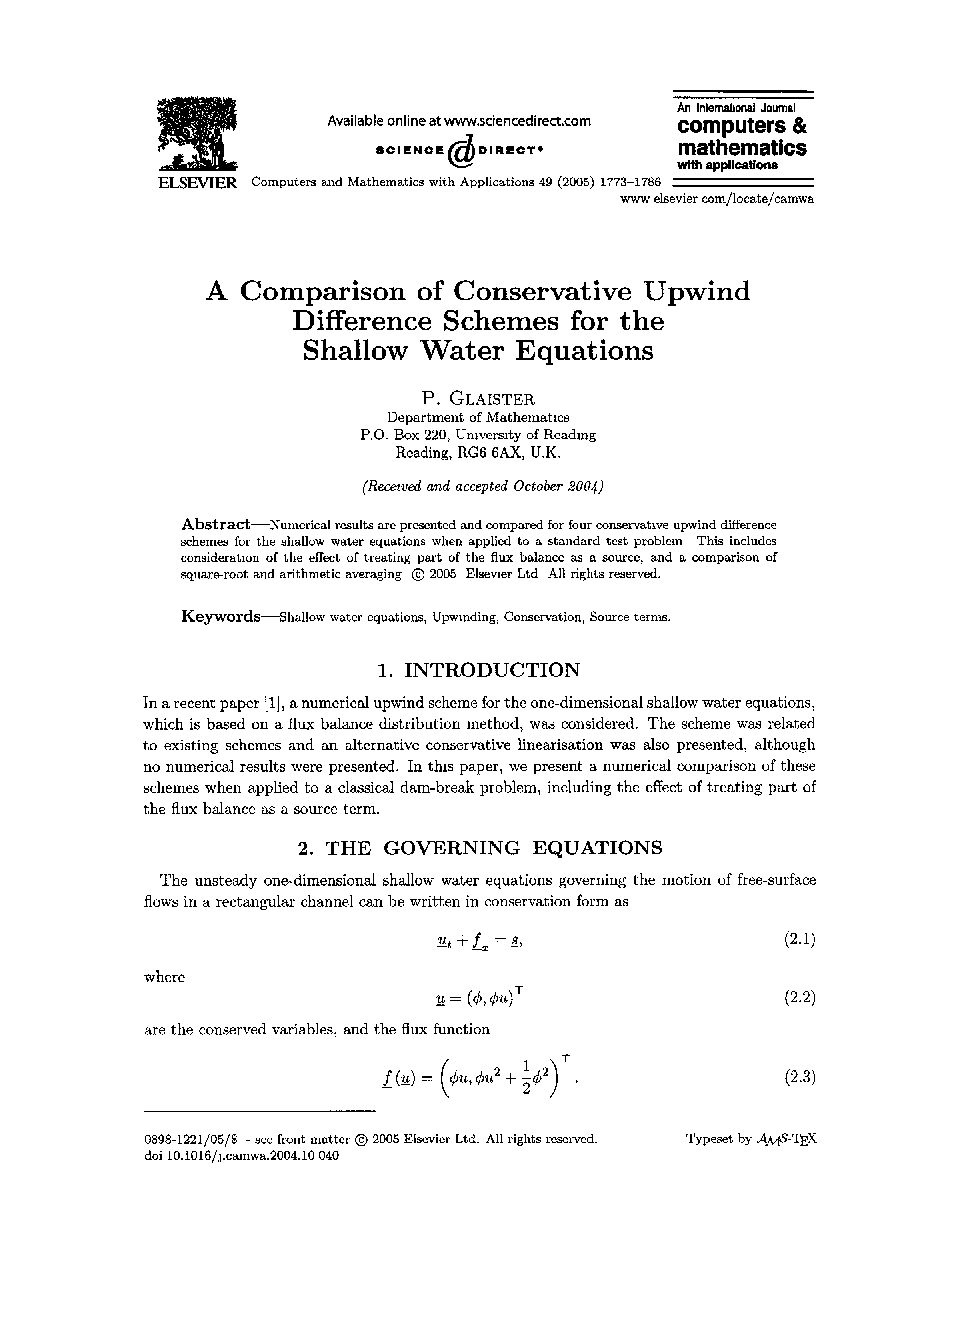 A comparison of conservative upwind difference schemes for the shallow water equations